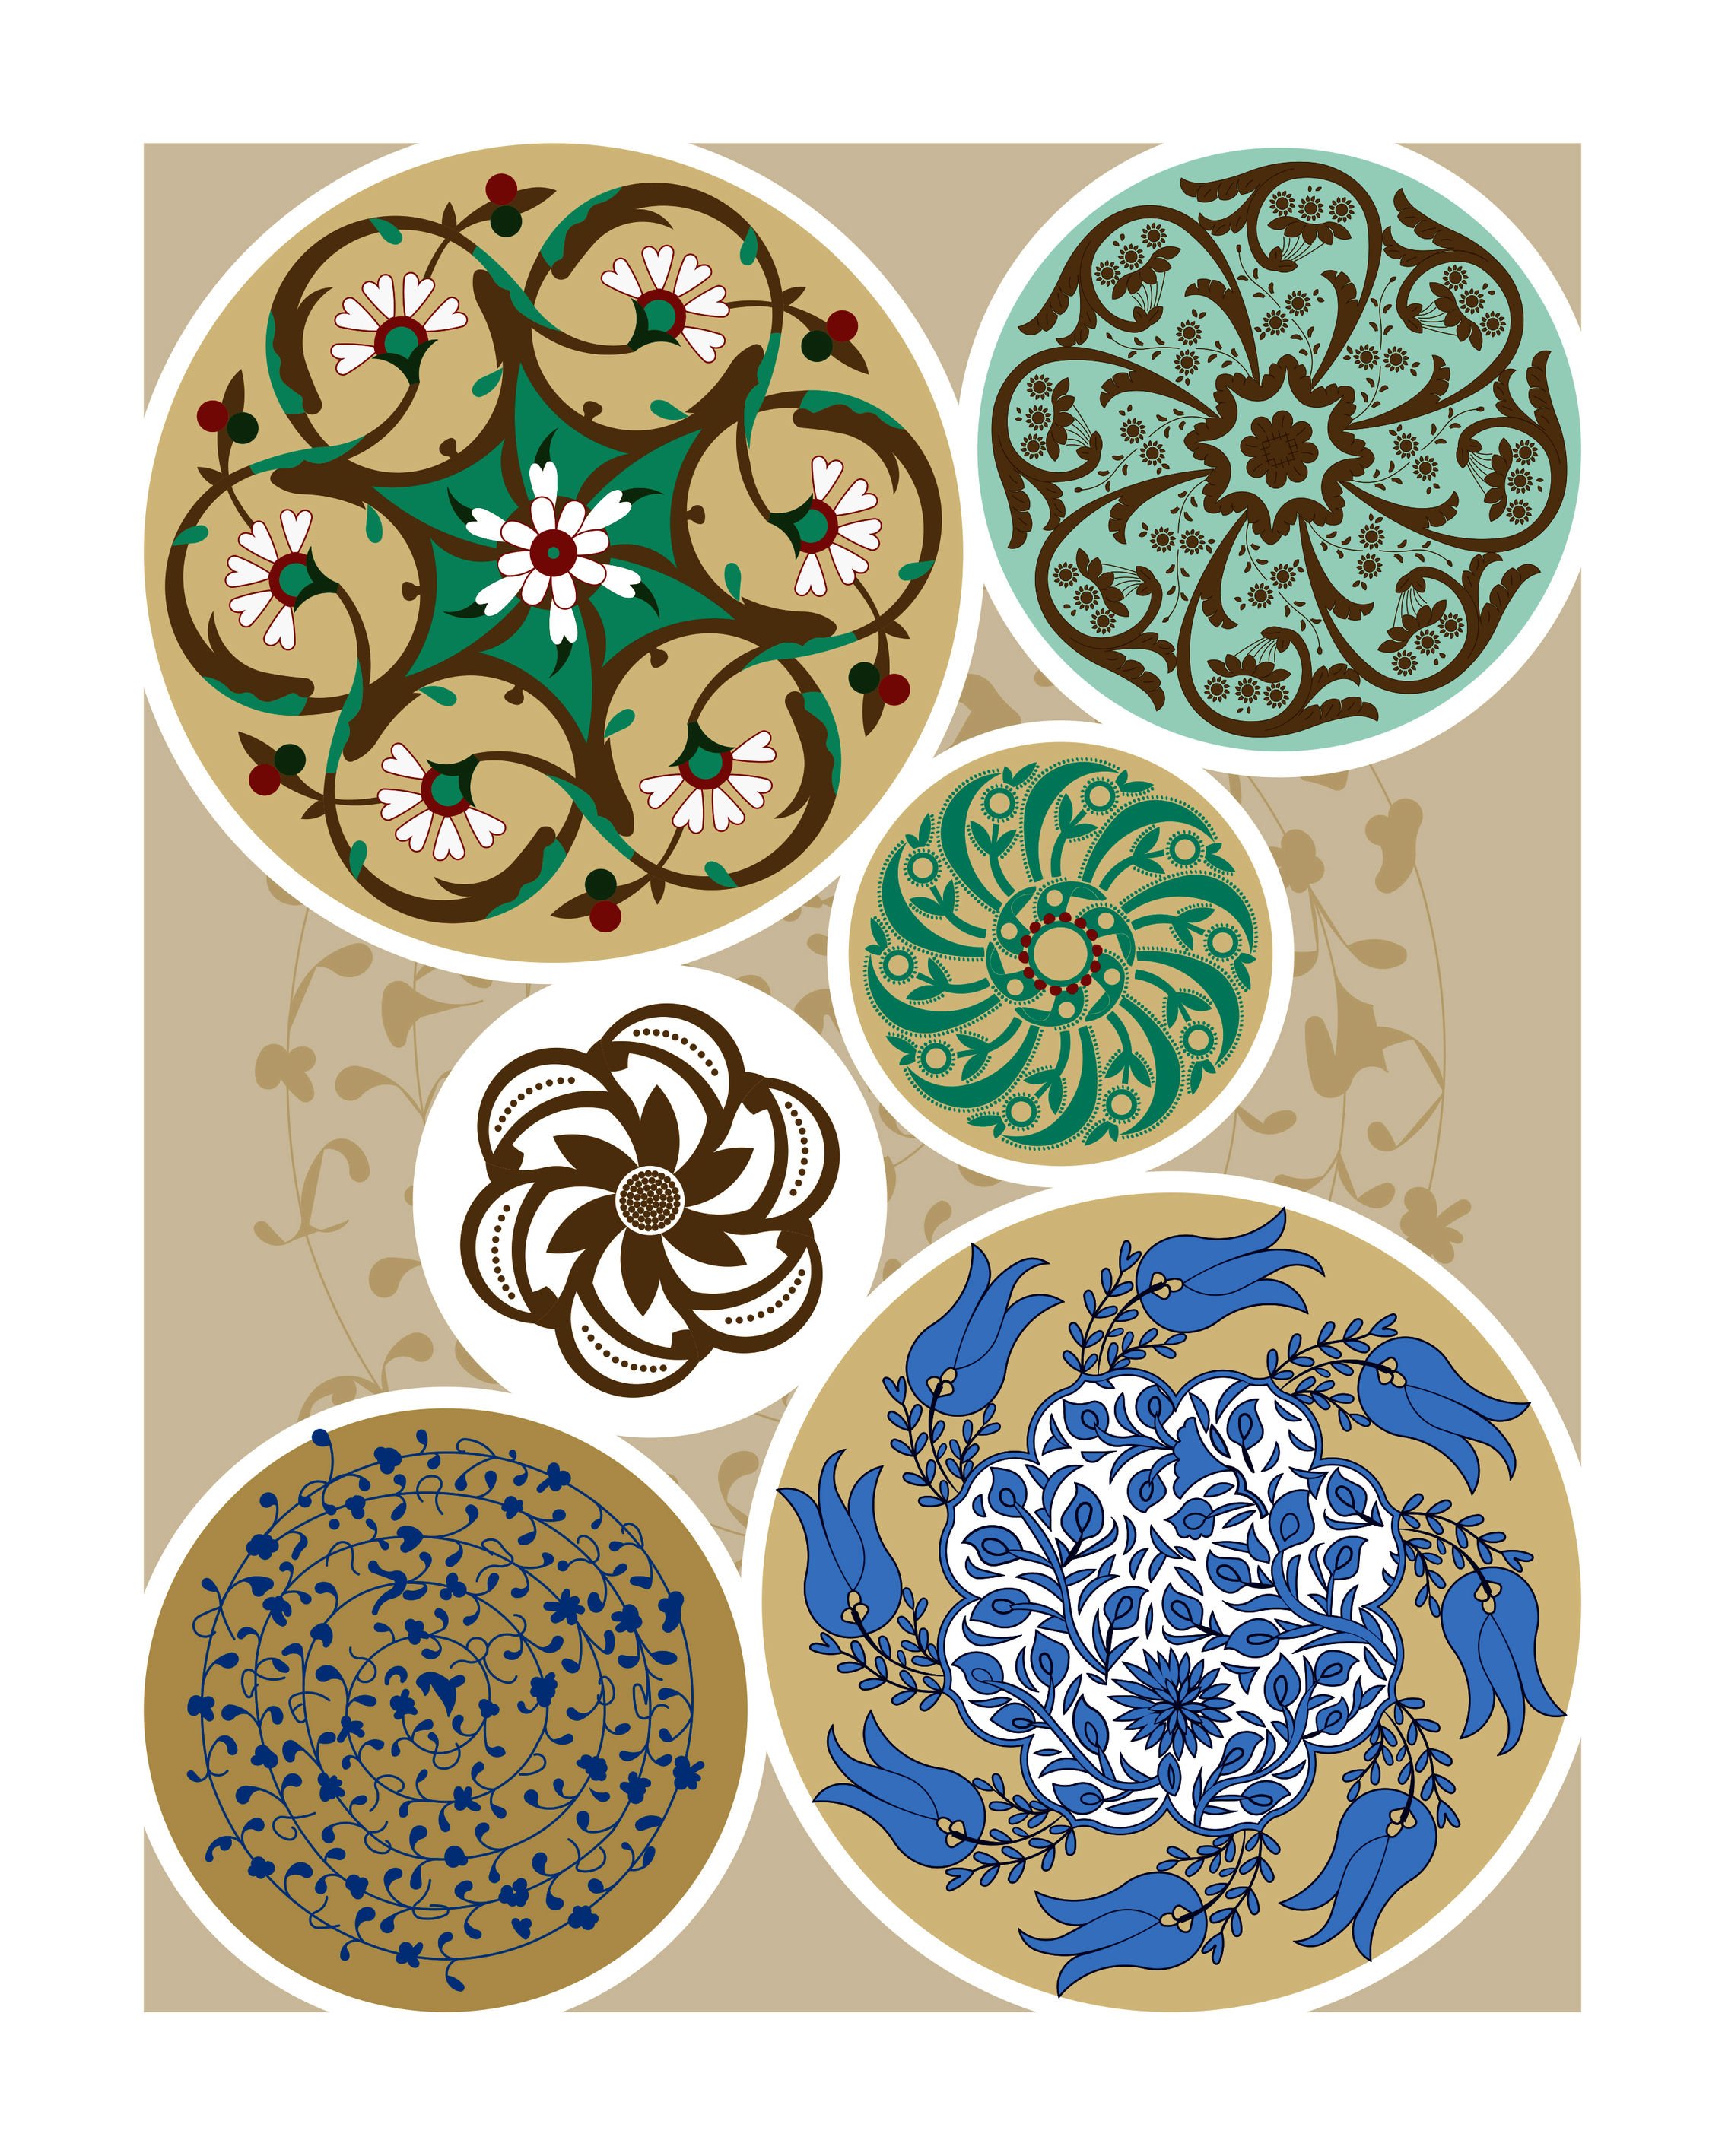 Different types of motifs in a wheel-of-fortune artwork.